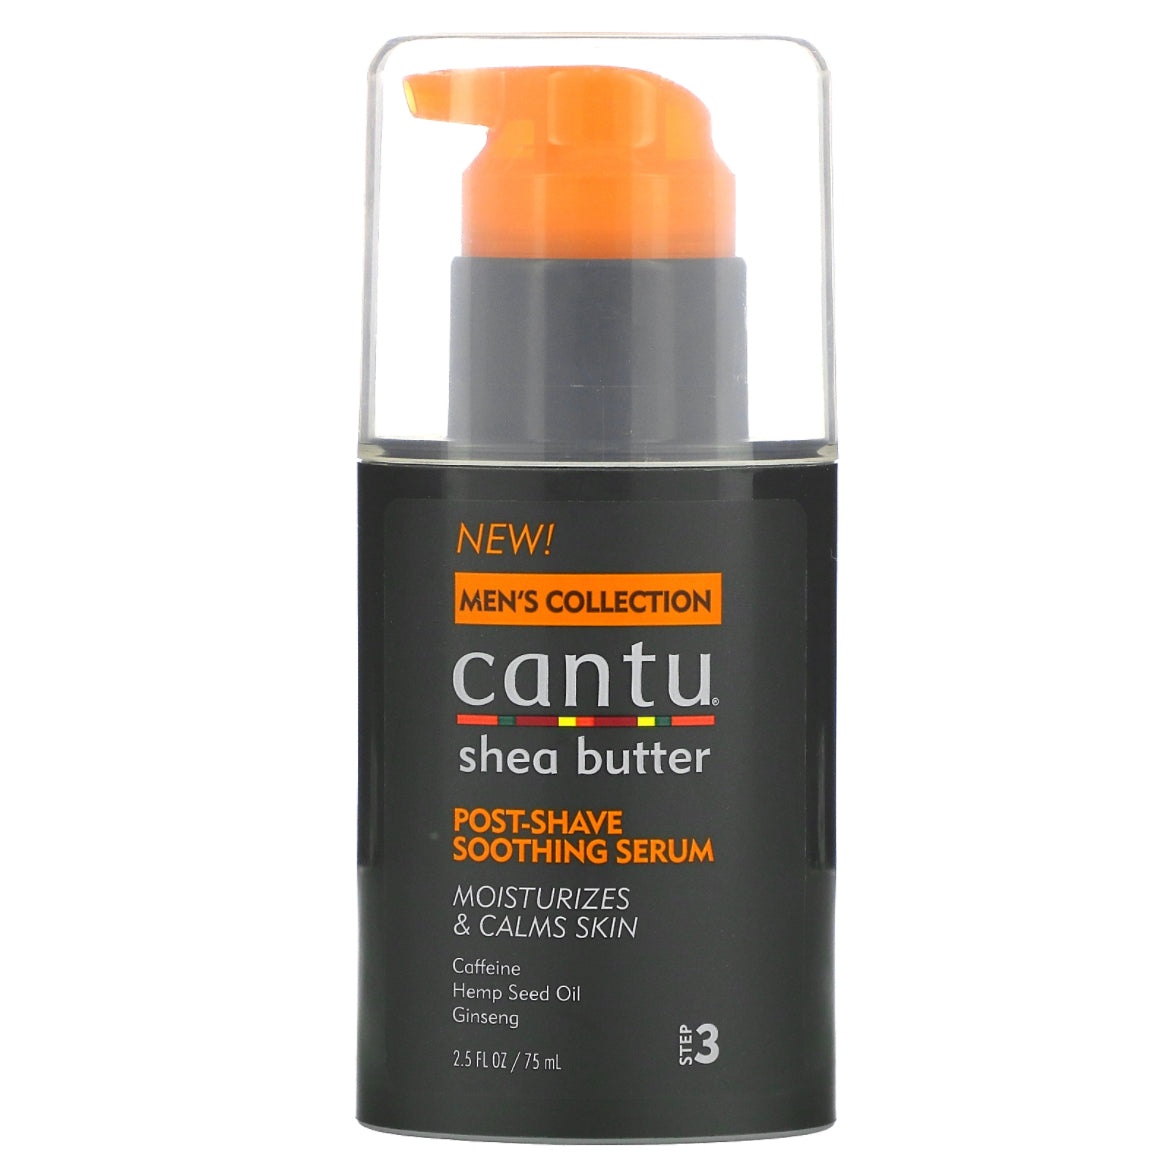 CANTU: POST-SHAVE SOOTHING SERUM 2.5OZ